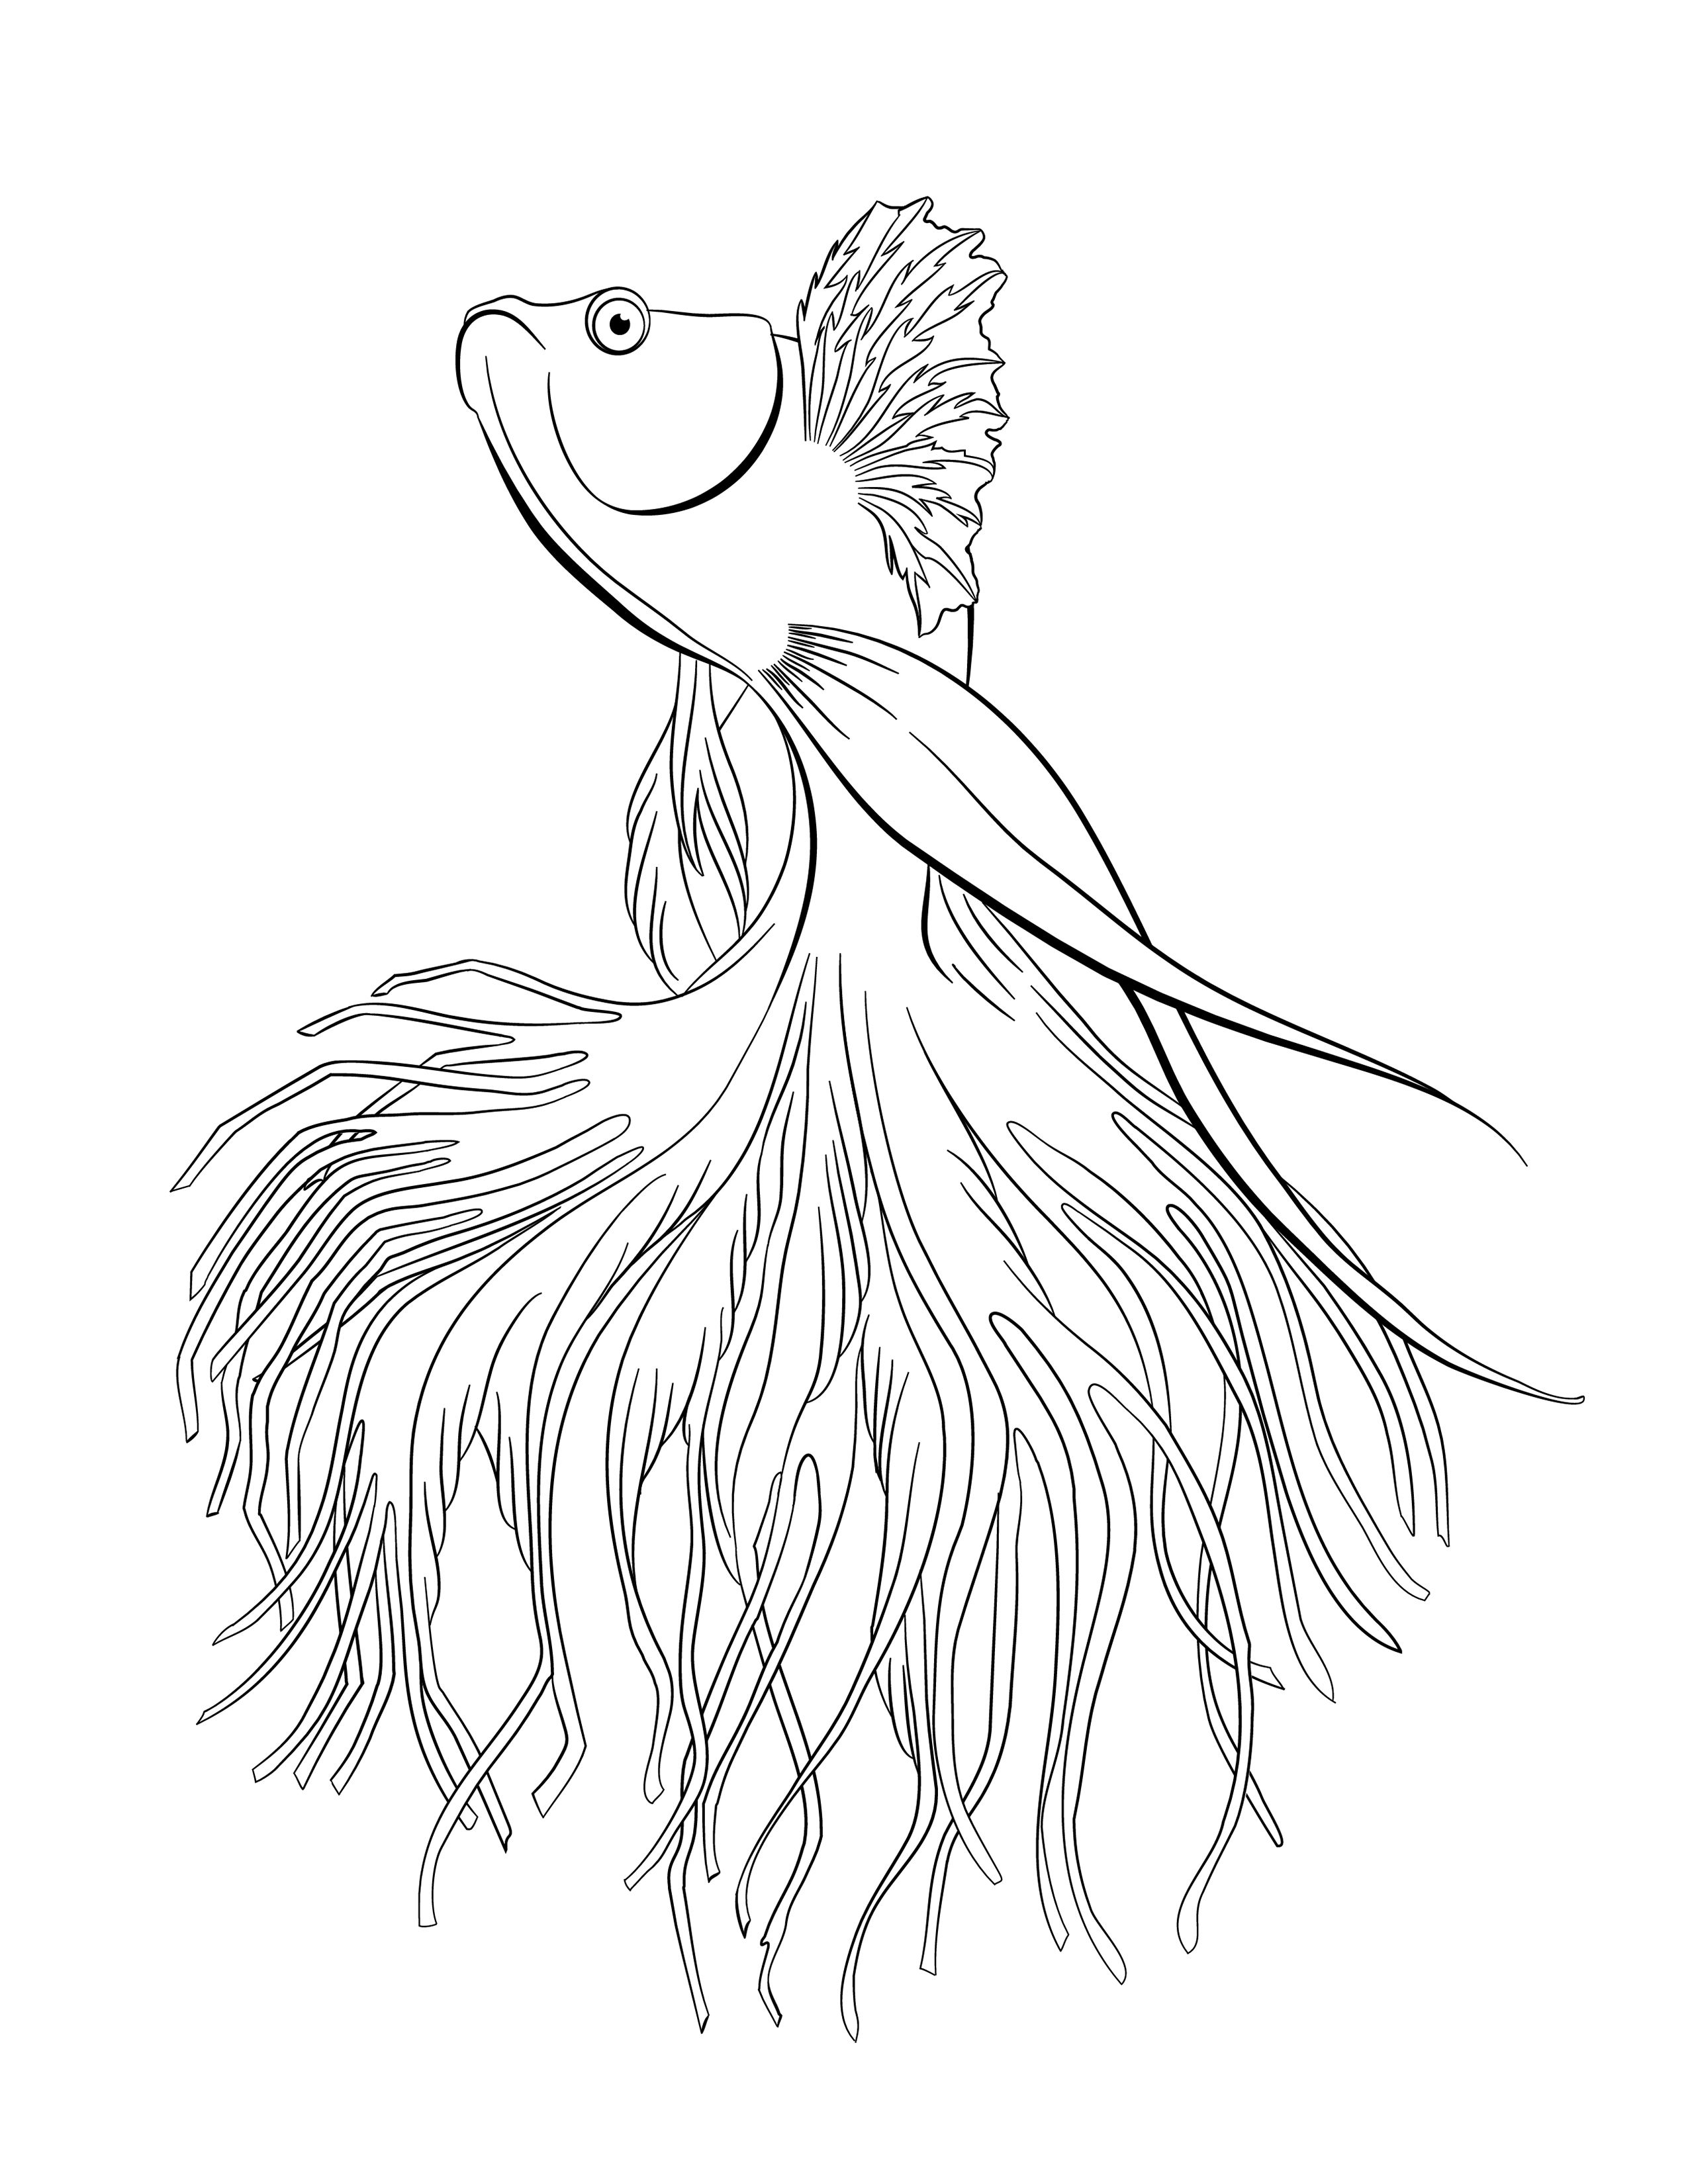 Drawing a Betta fish to colour. — Steemit